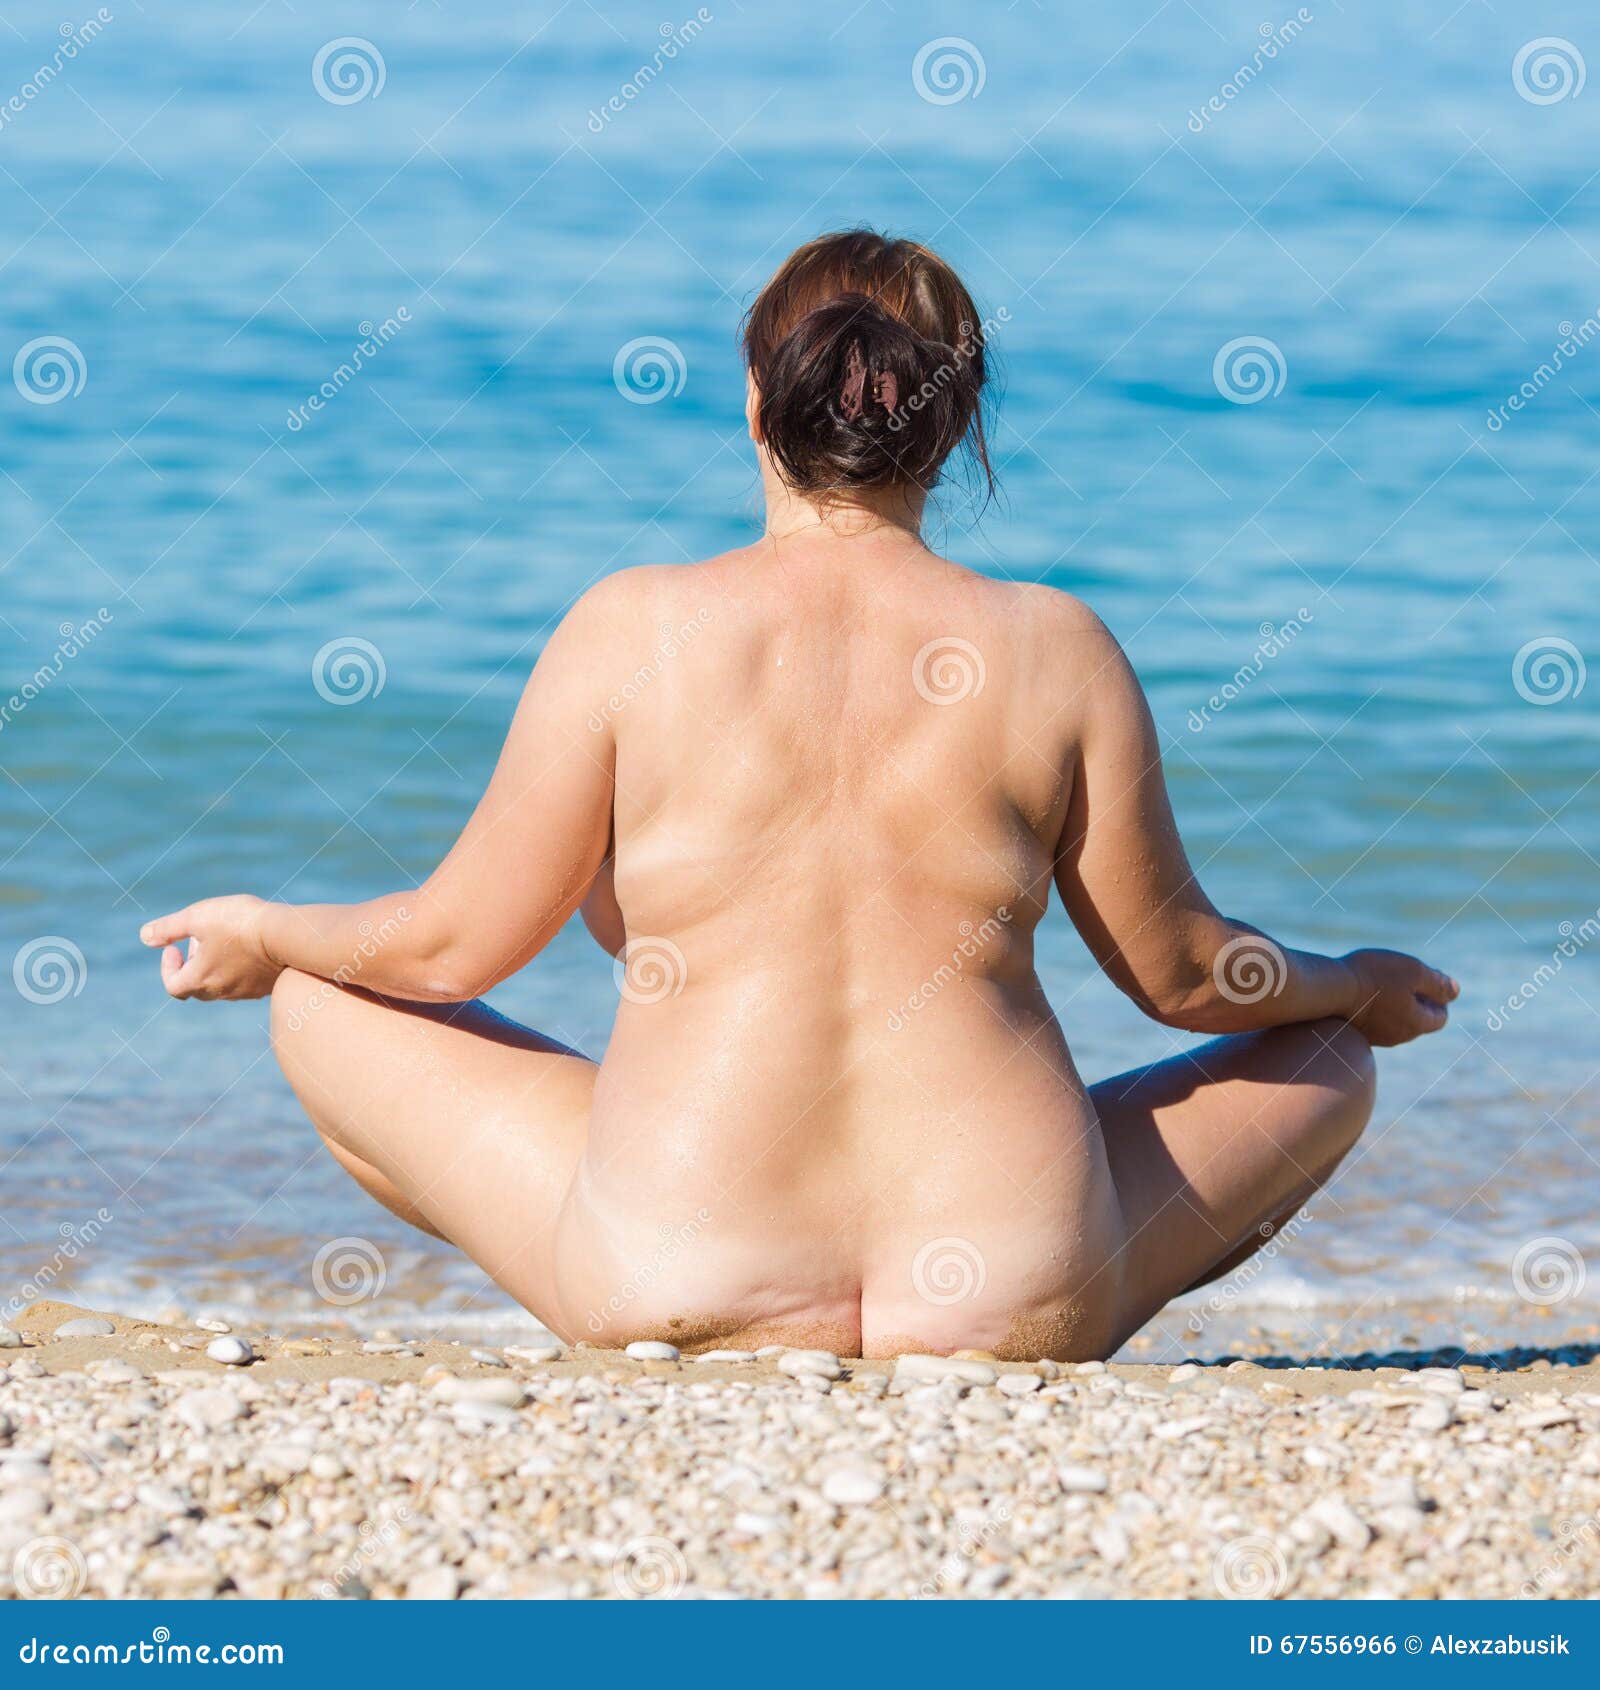 Photo about Overweight middle aged woman at the sea. 